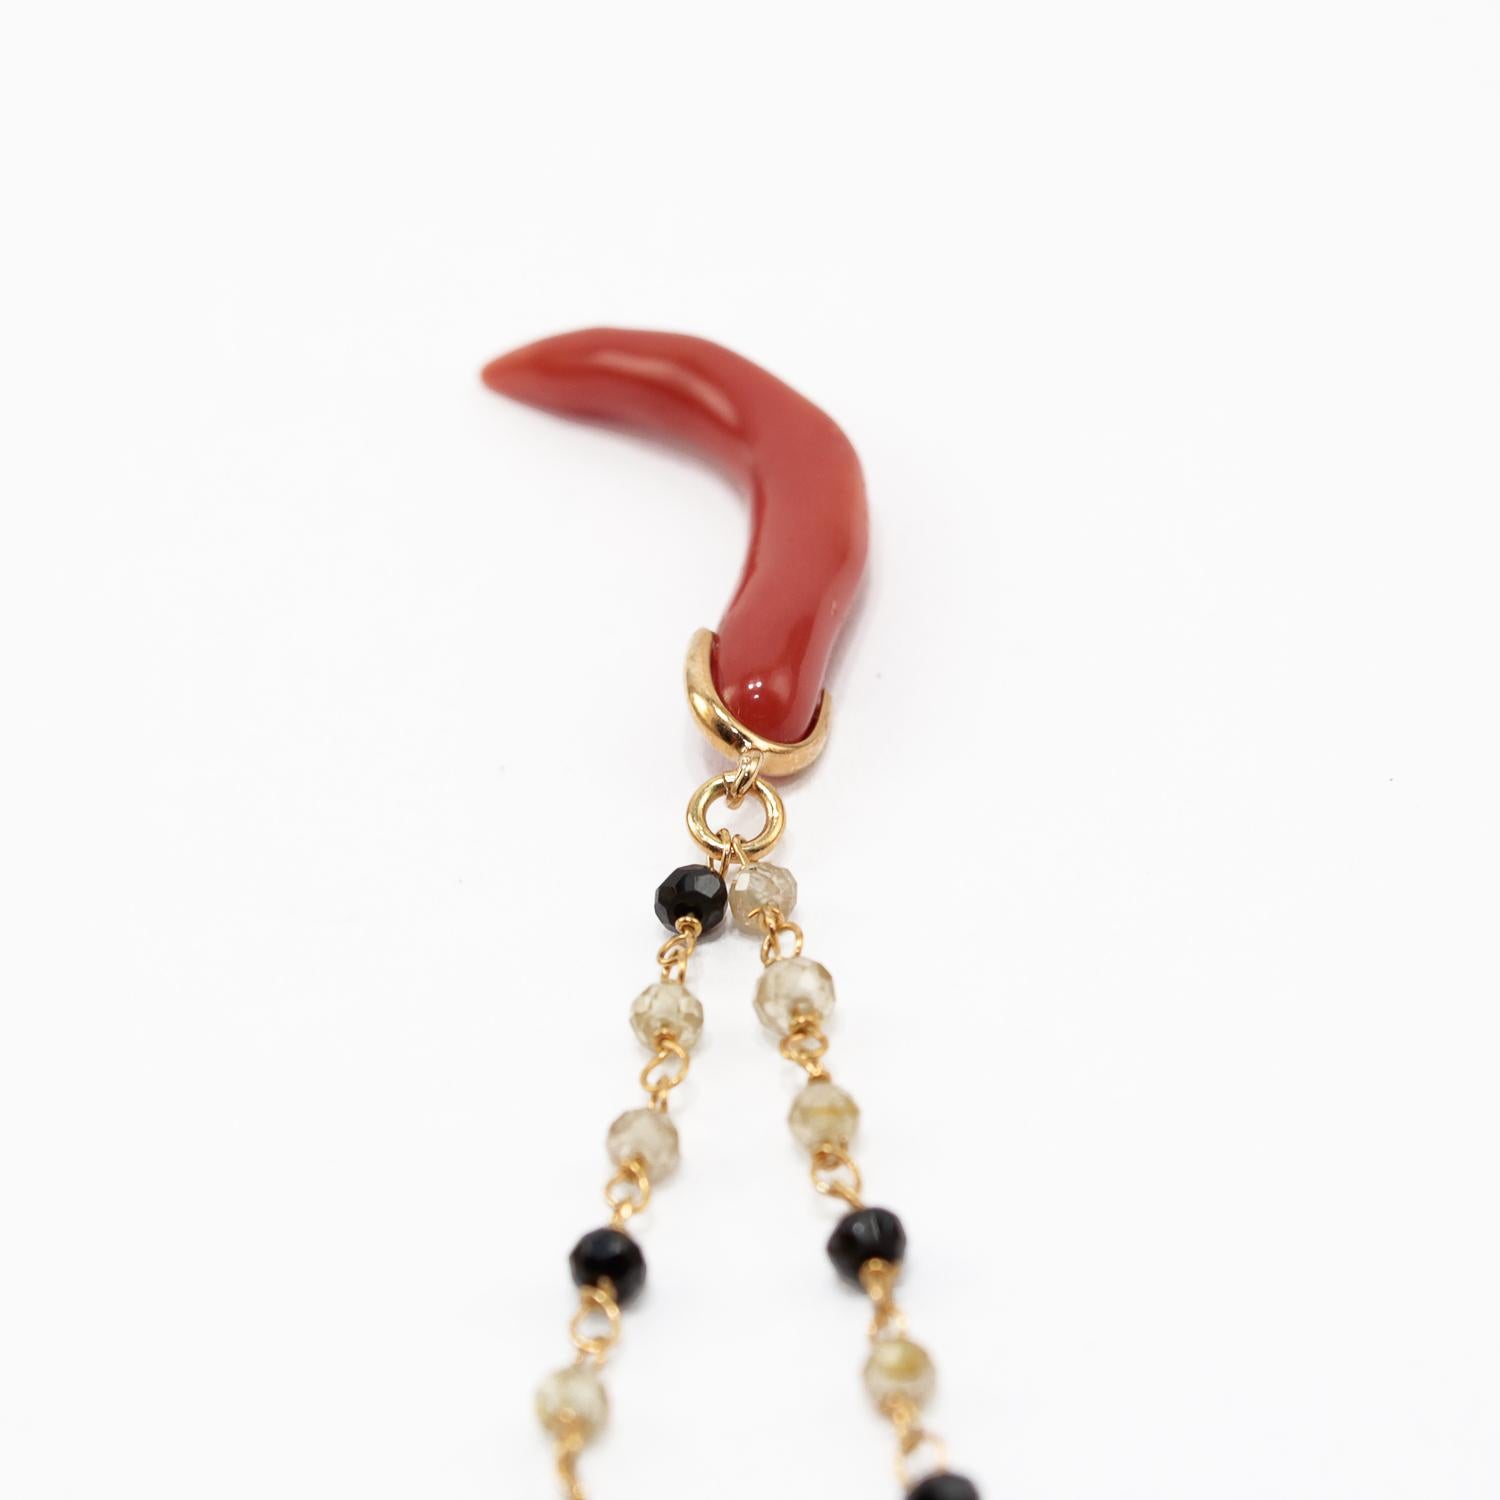 Rough Cut Pendant Necklace in Red Coral, Natural Zircons, Black Spinel and 18 Karat Gold For Sale